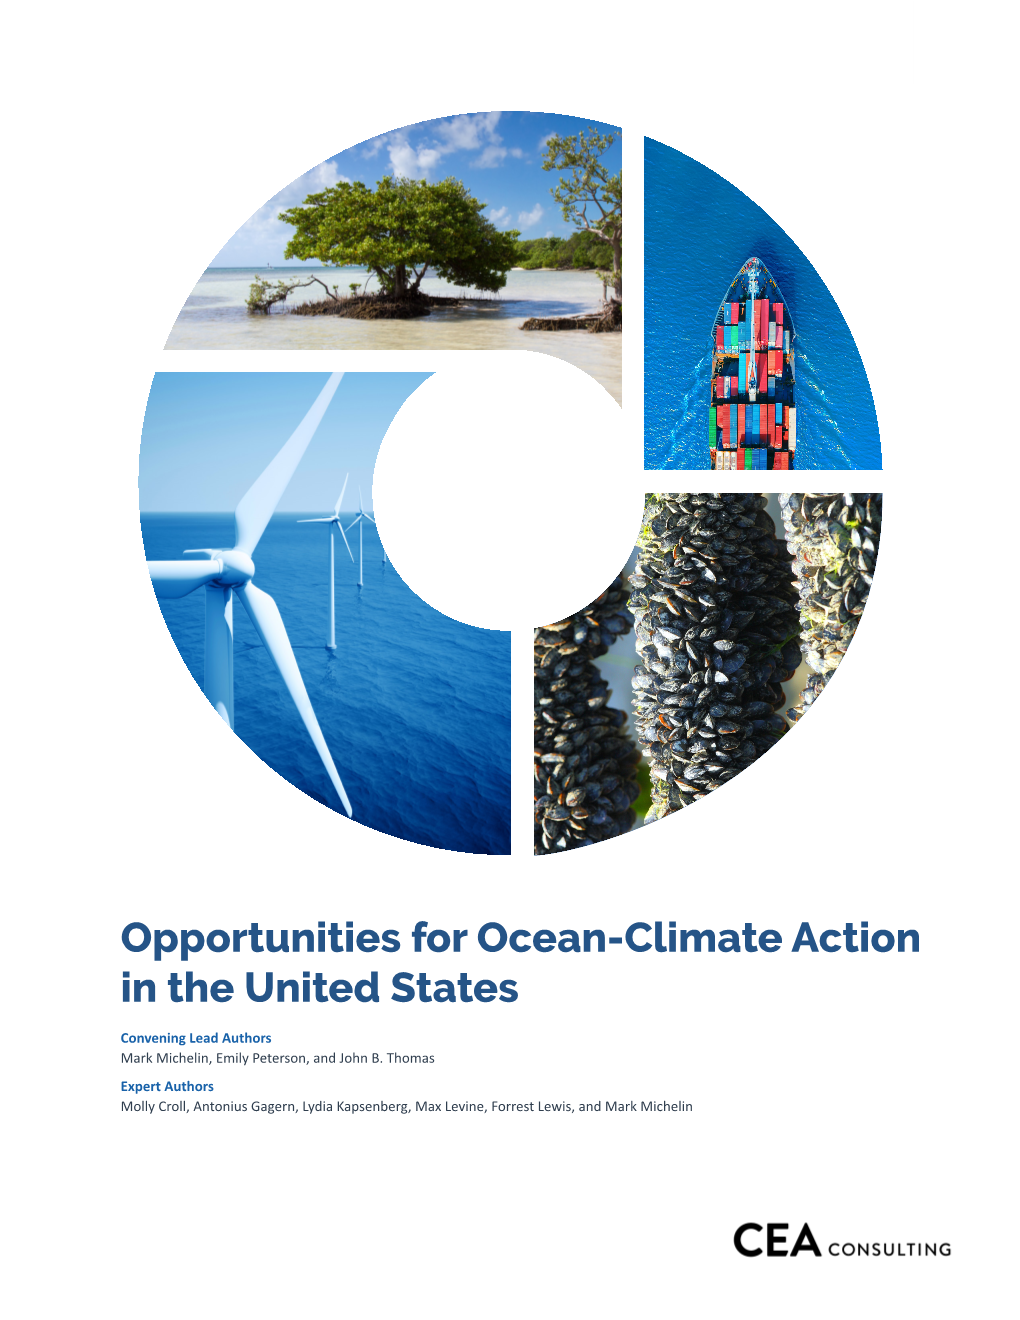 Opportunities for Ocean-Climate Action in the United States